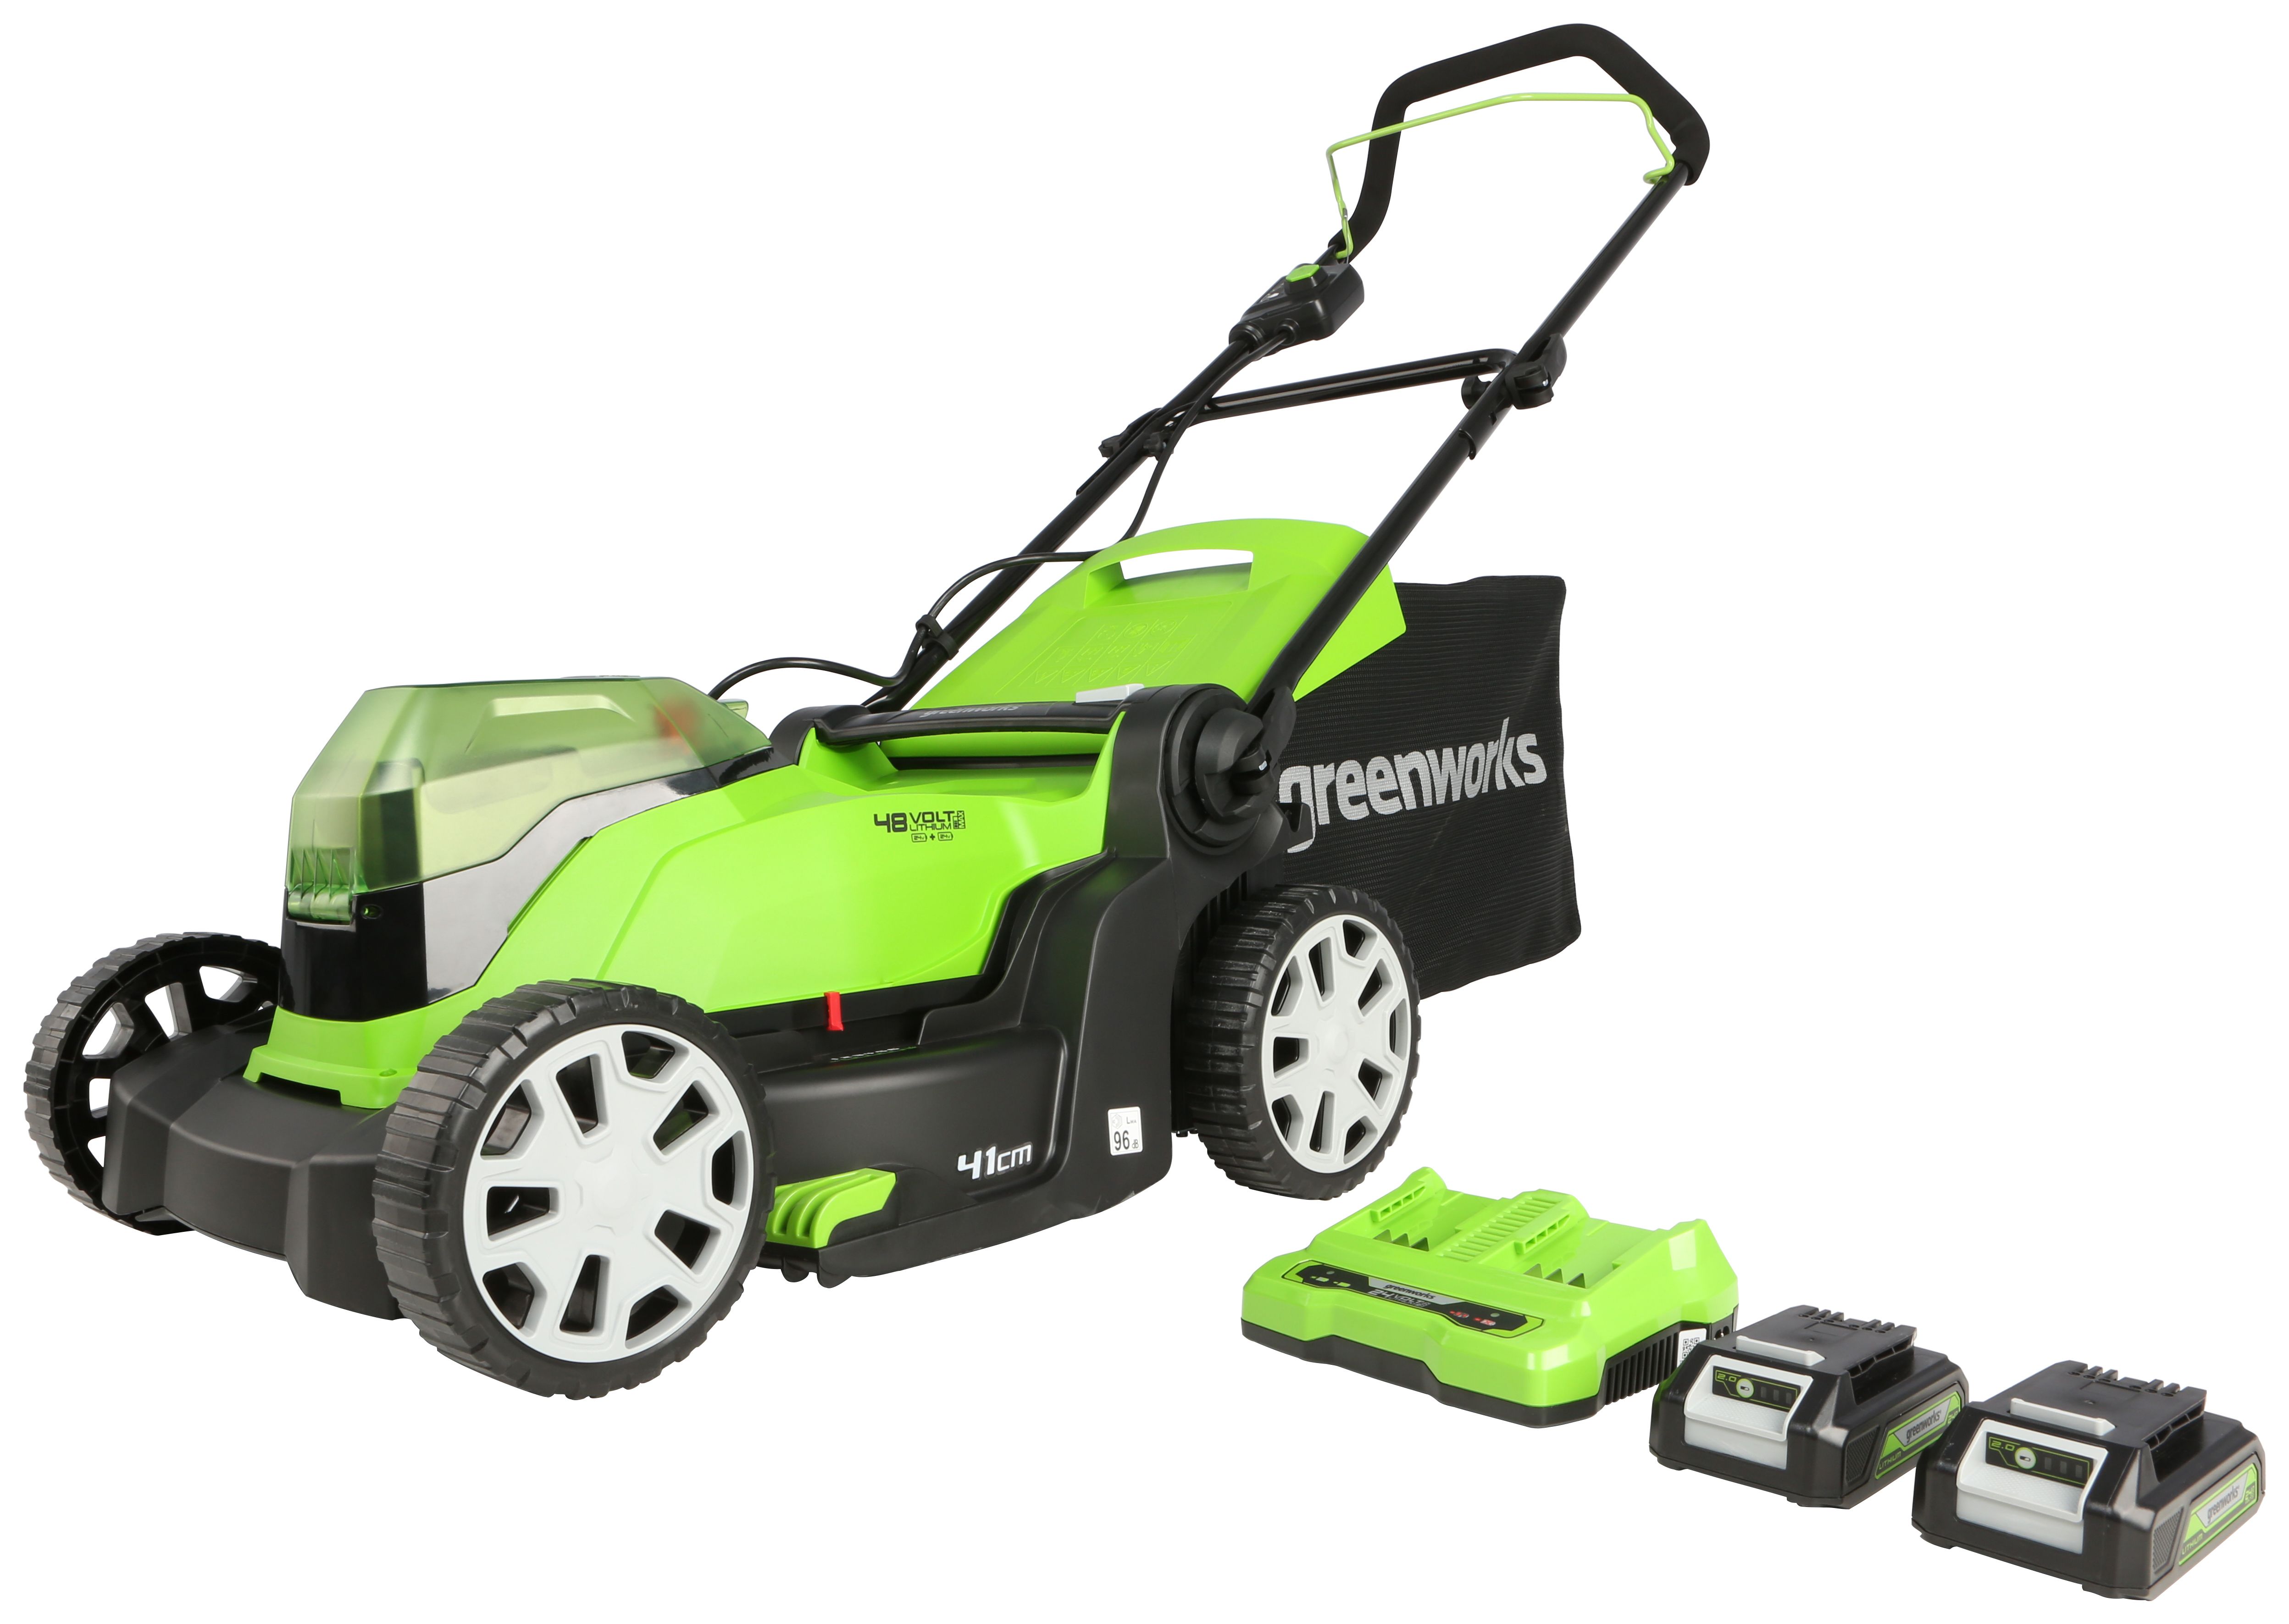 Image of Greenworks Cordless Lawn Mower 48V with 2 x 24V 2Ah Batteries & Charger - 41cm